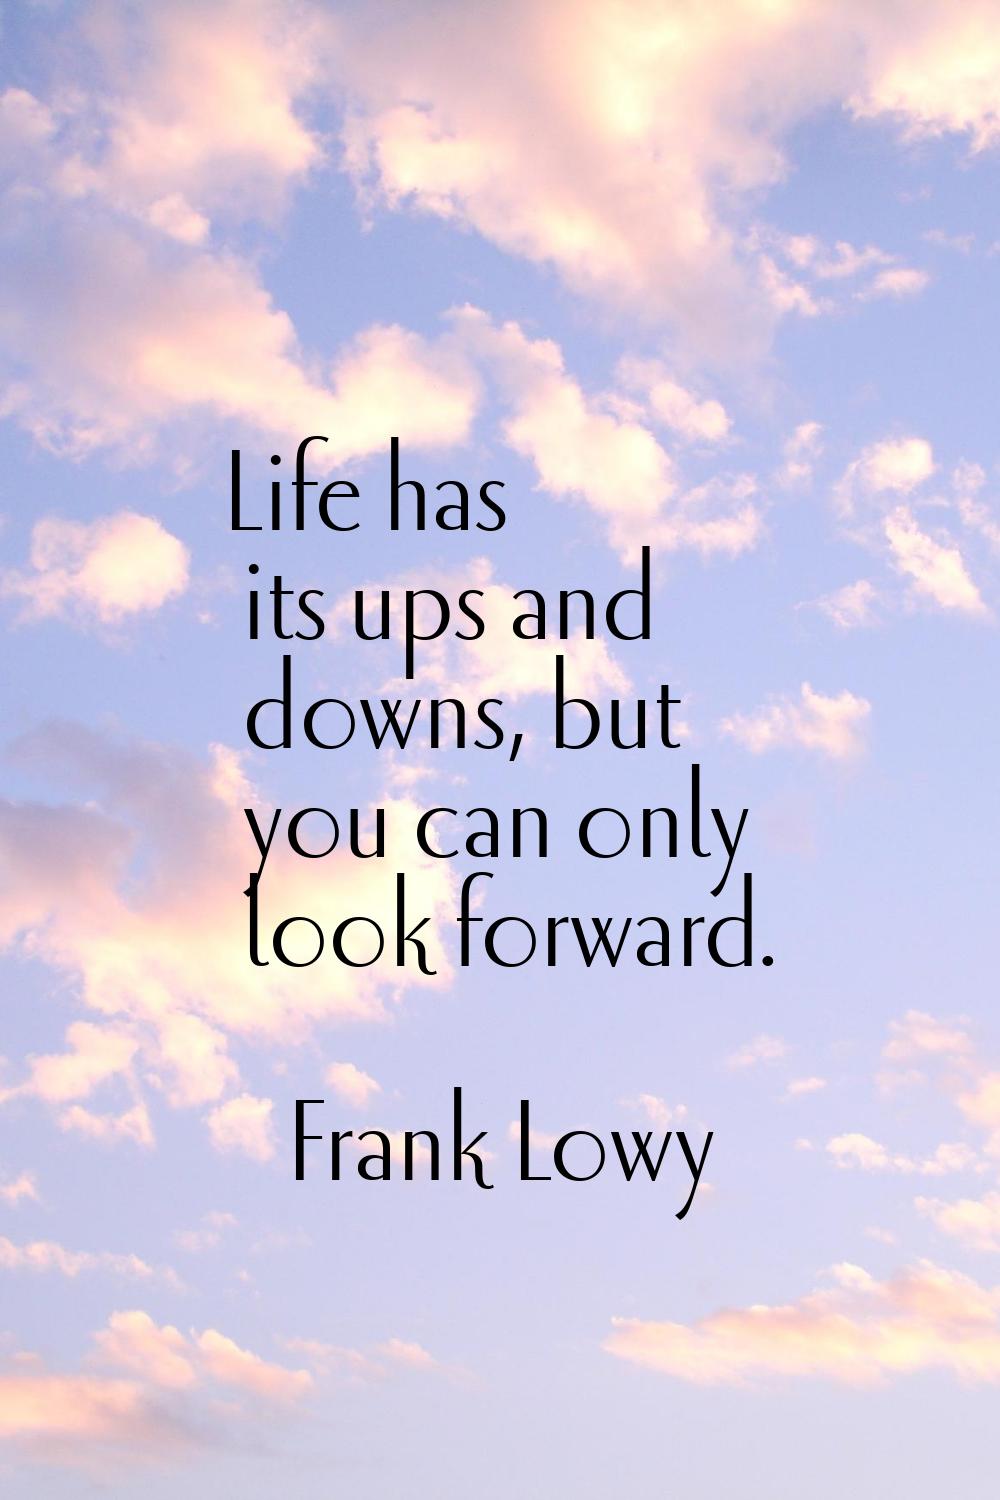 Life has its ups and downs, but you can only look forward.